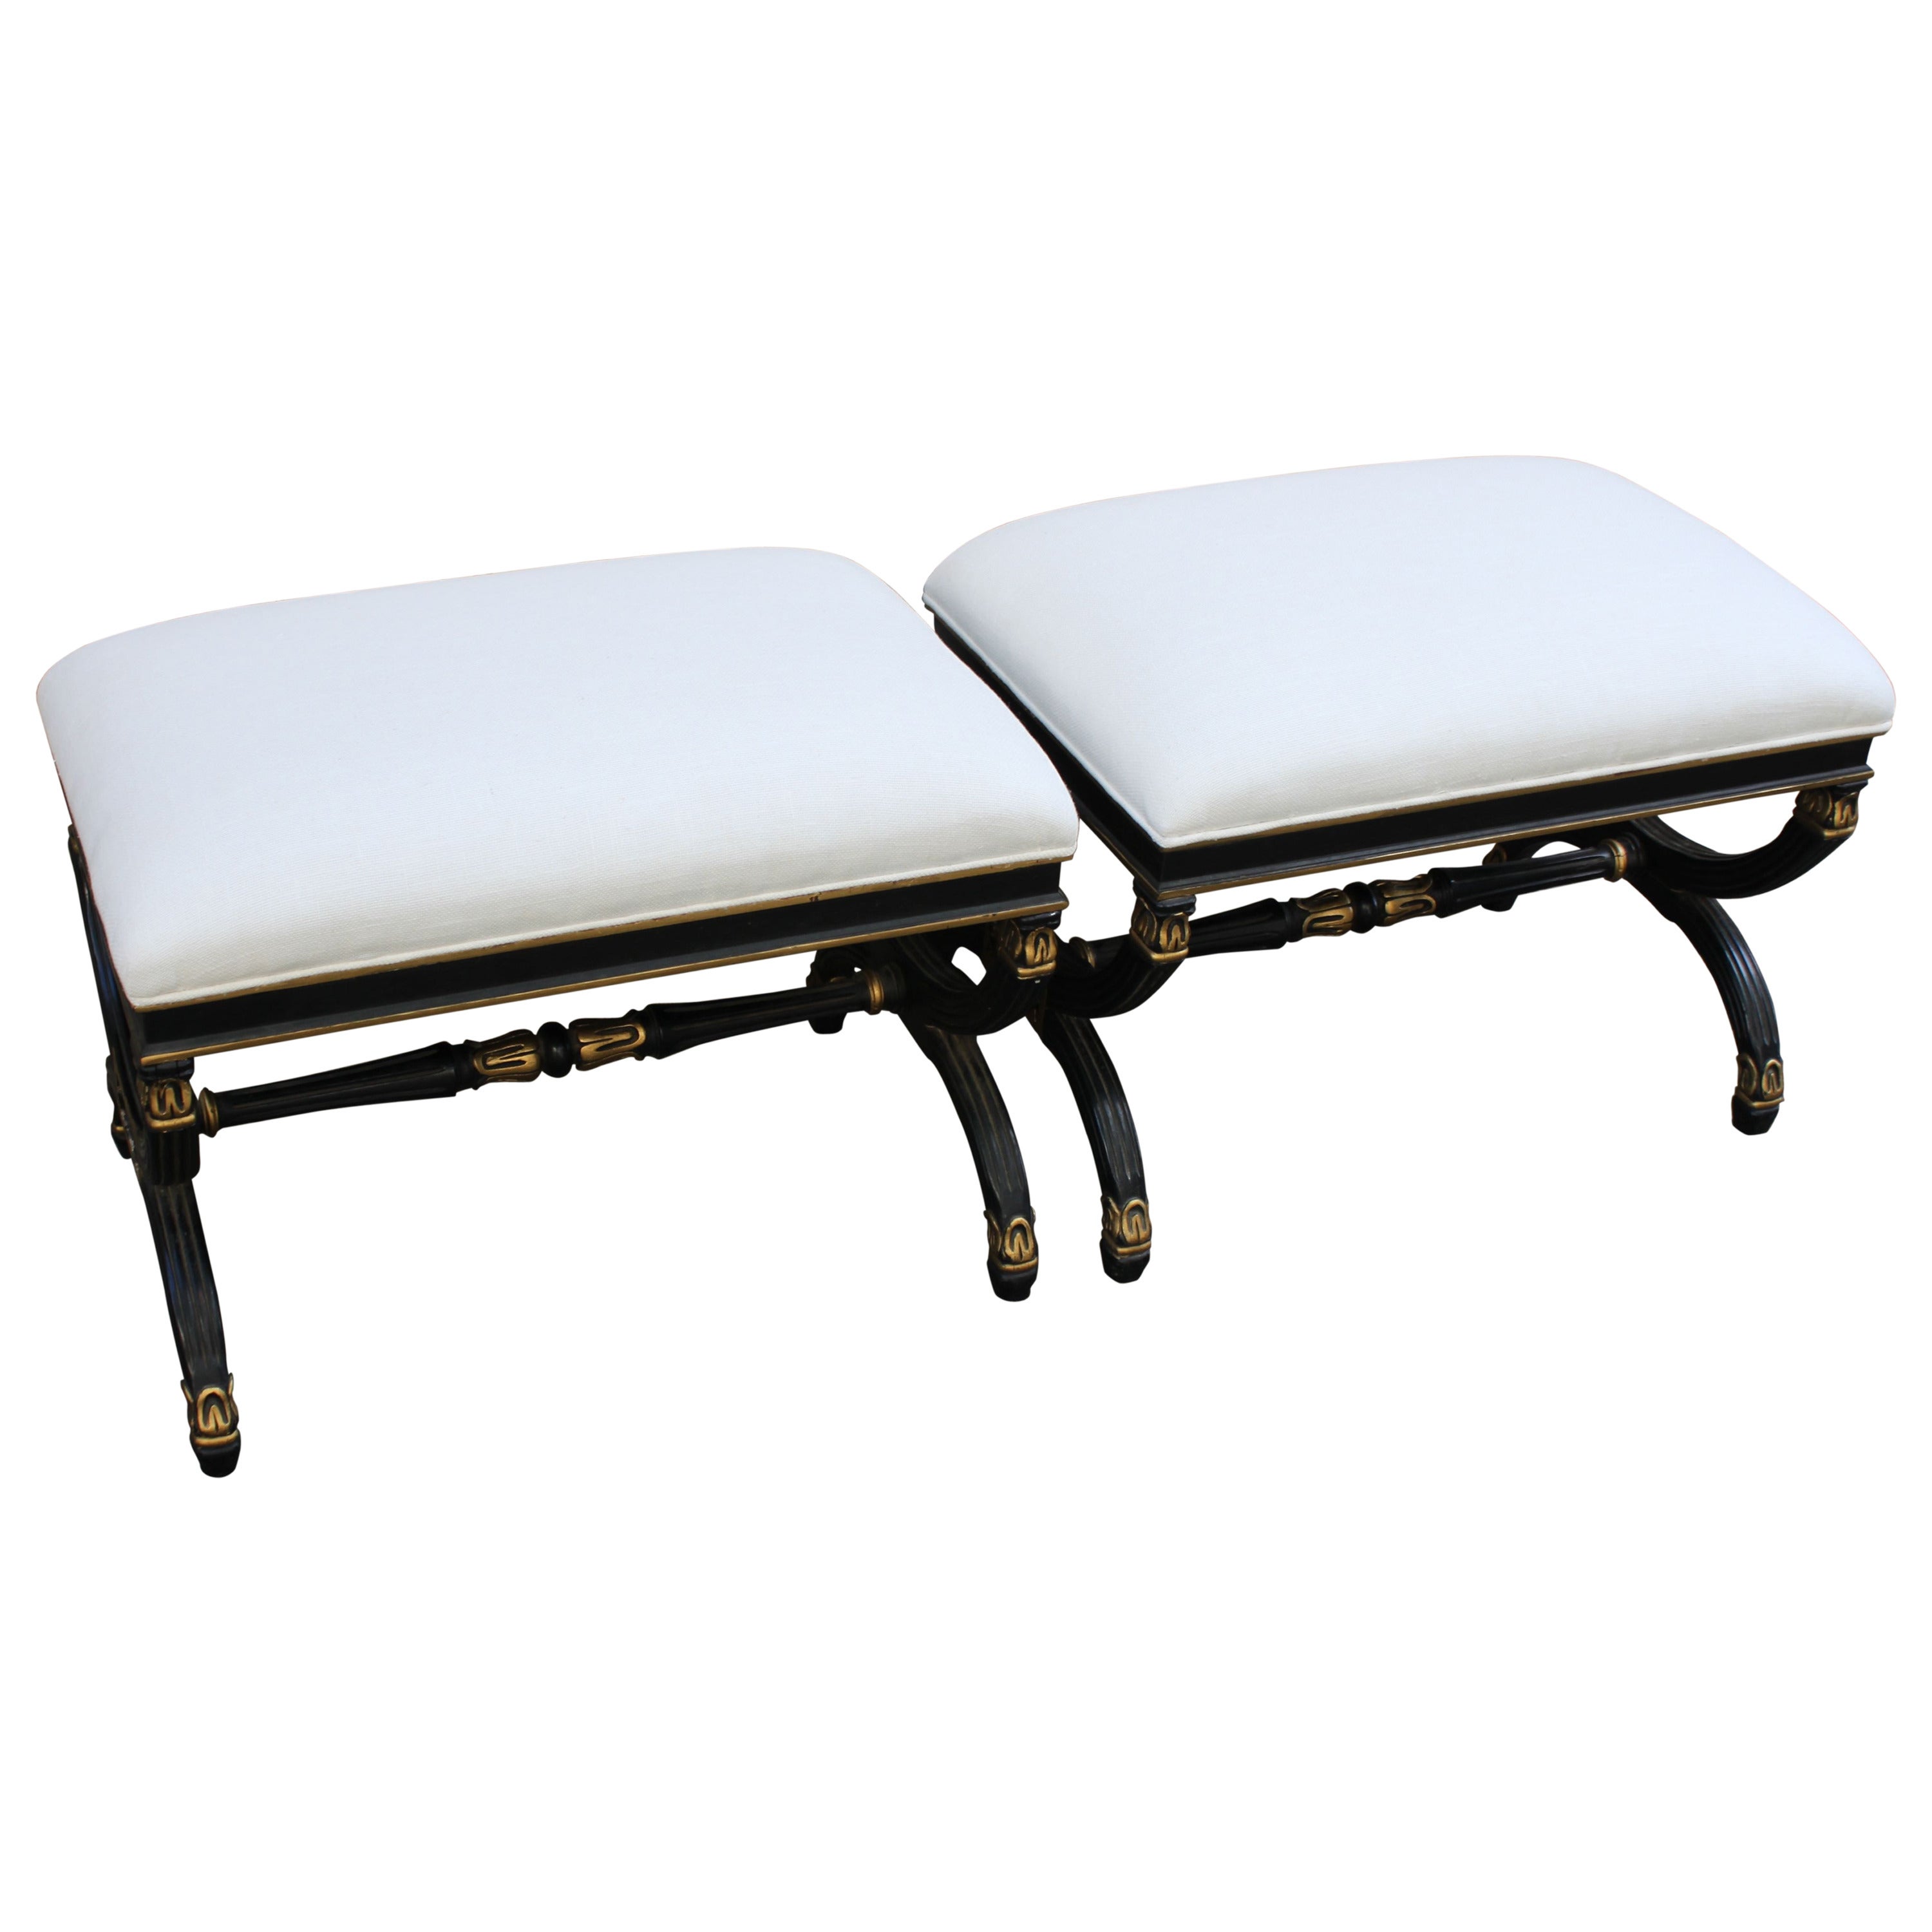 Pair of Regency Style Ebony and Gilt Stools or Benches, 20th Century